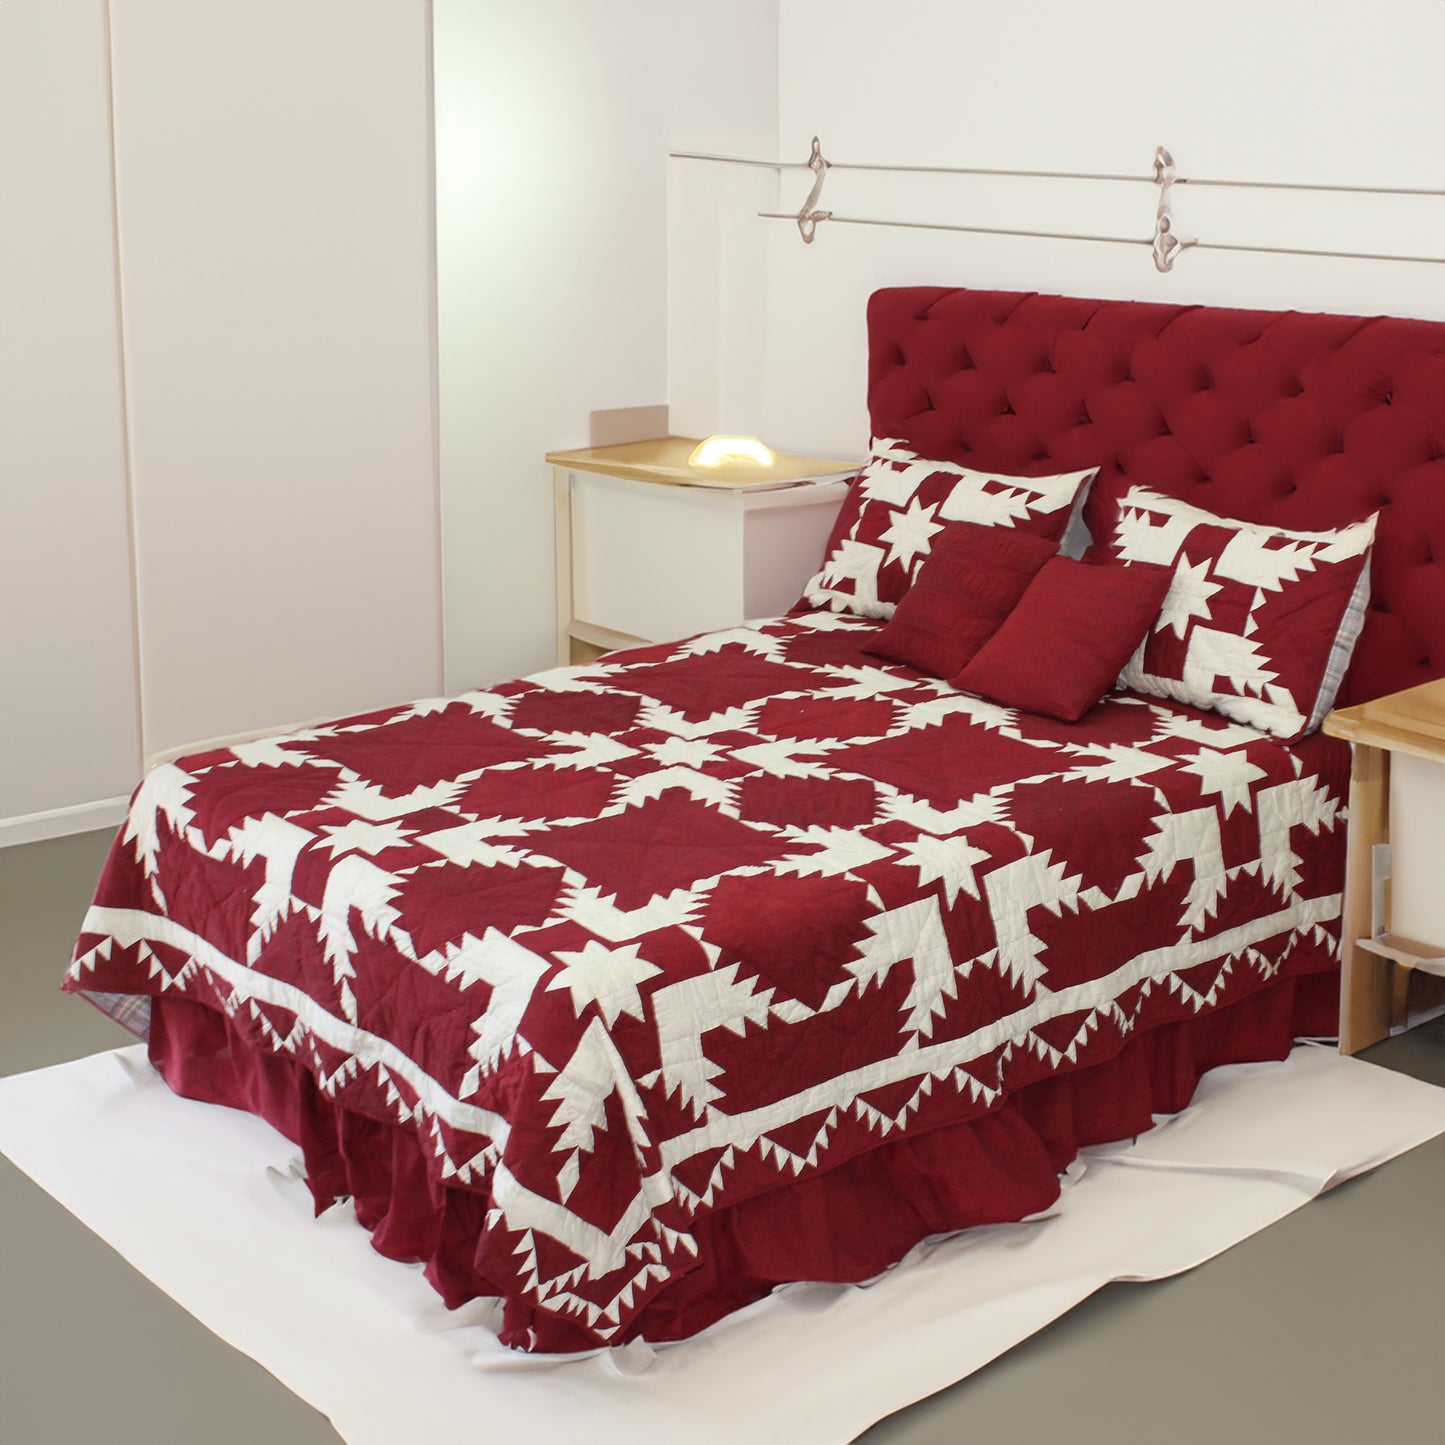 Red Feathered Star Quilt, Hand cut and Patchwork cotton fabric blocks.